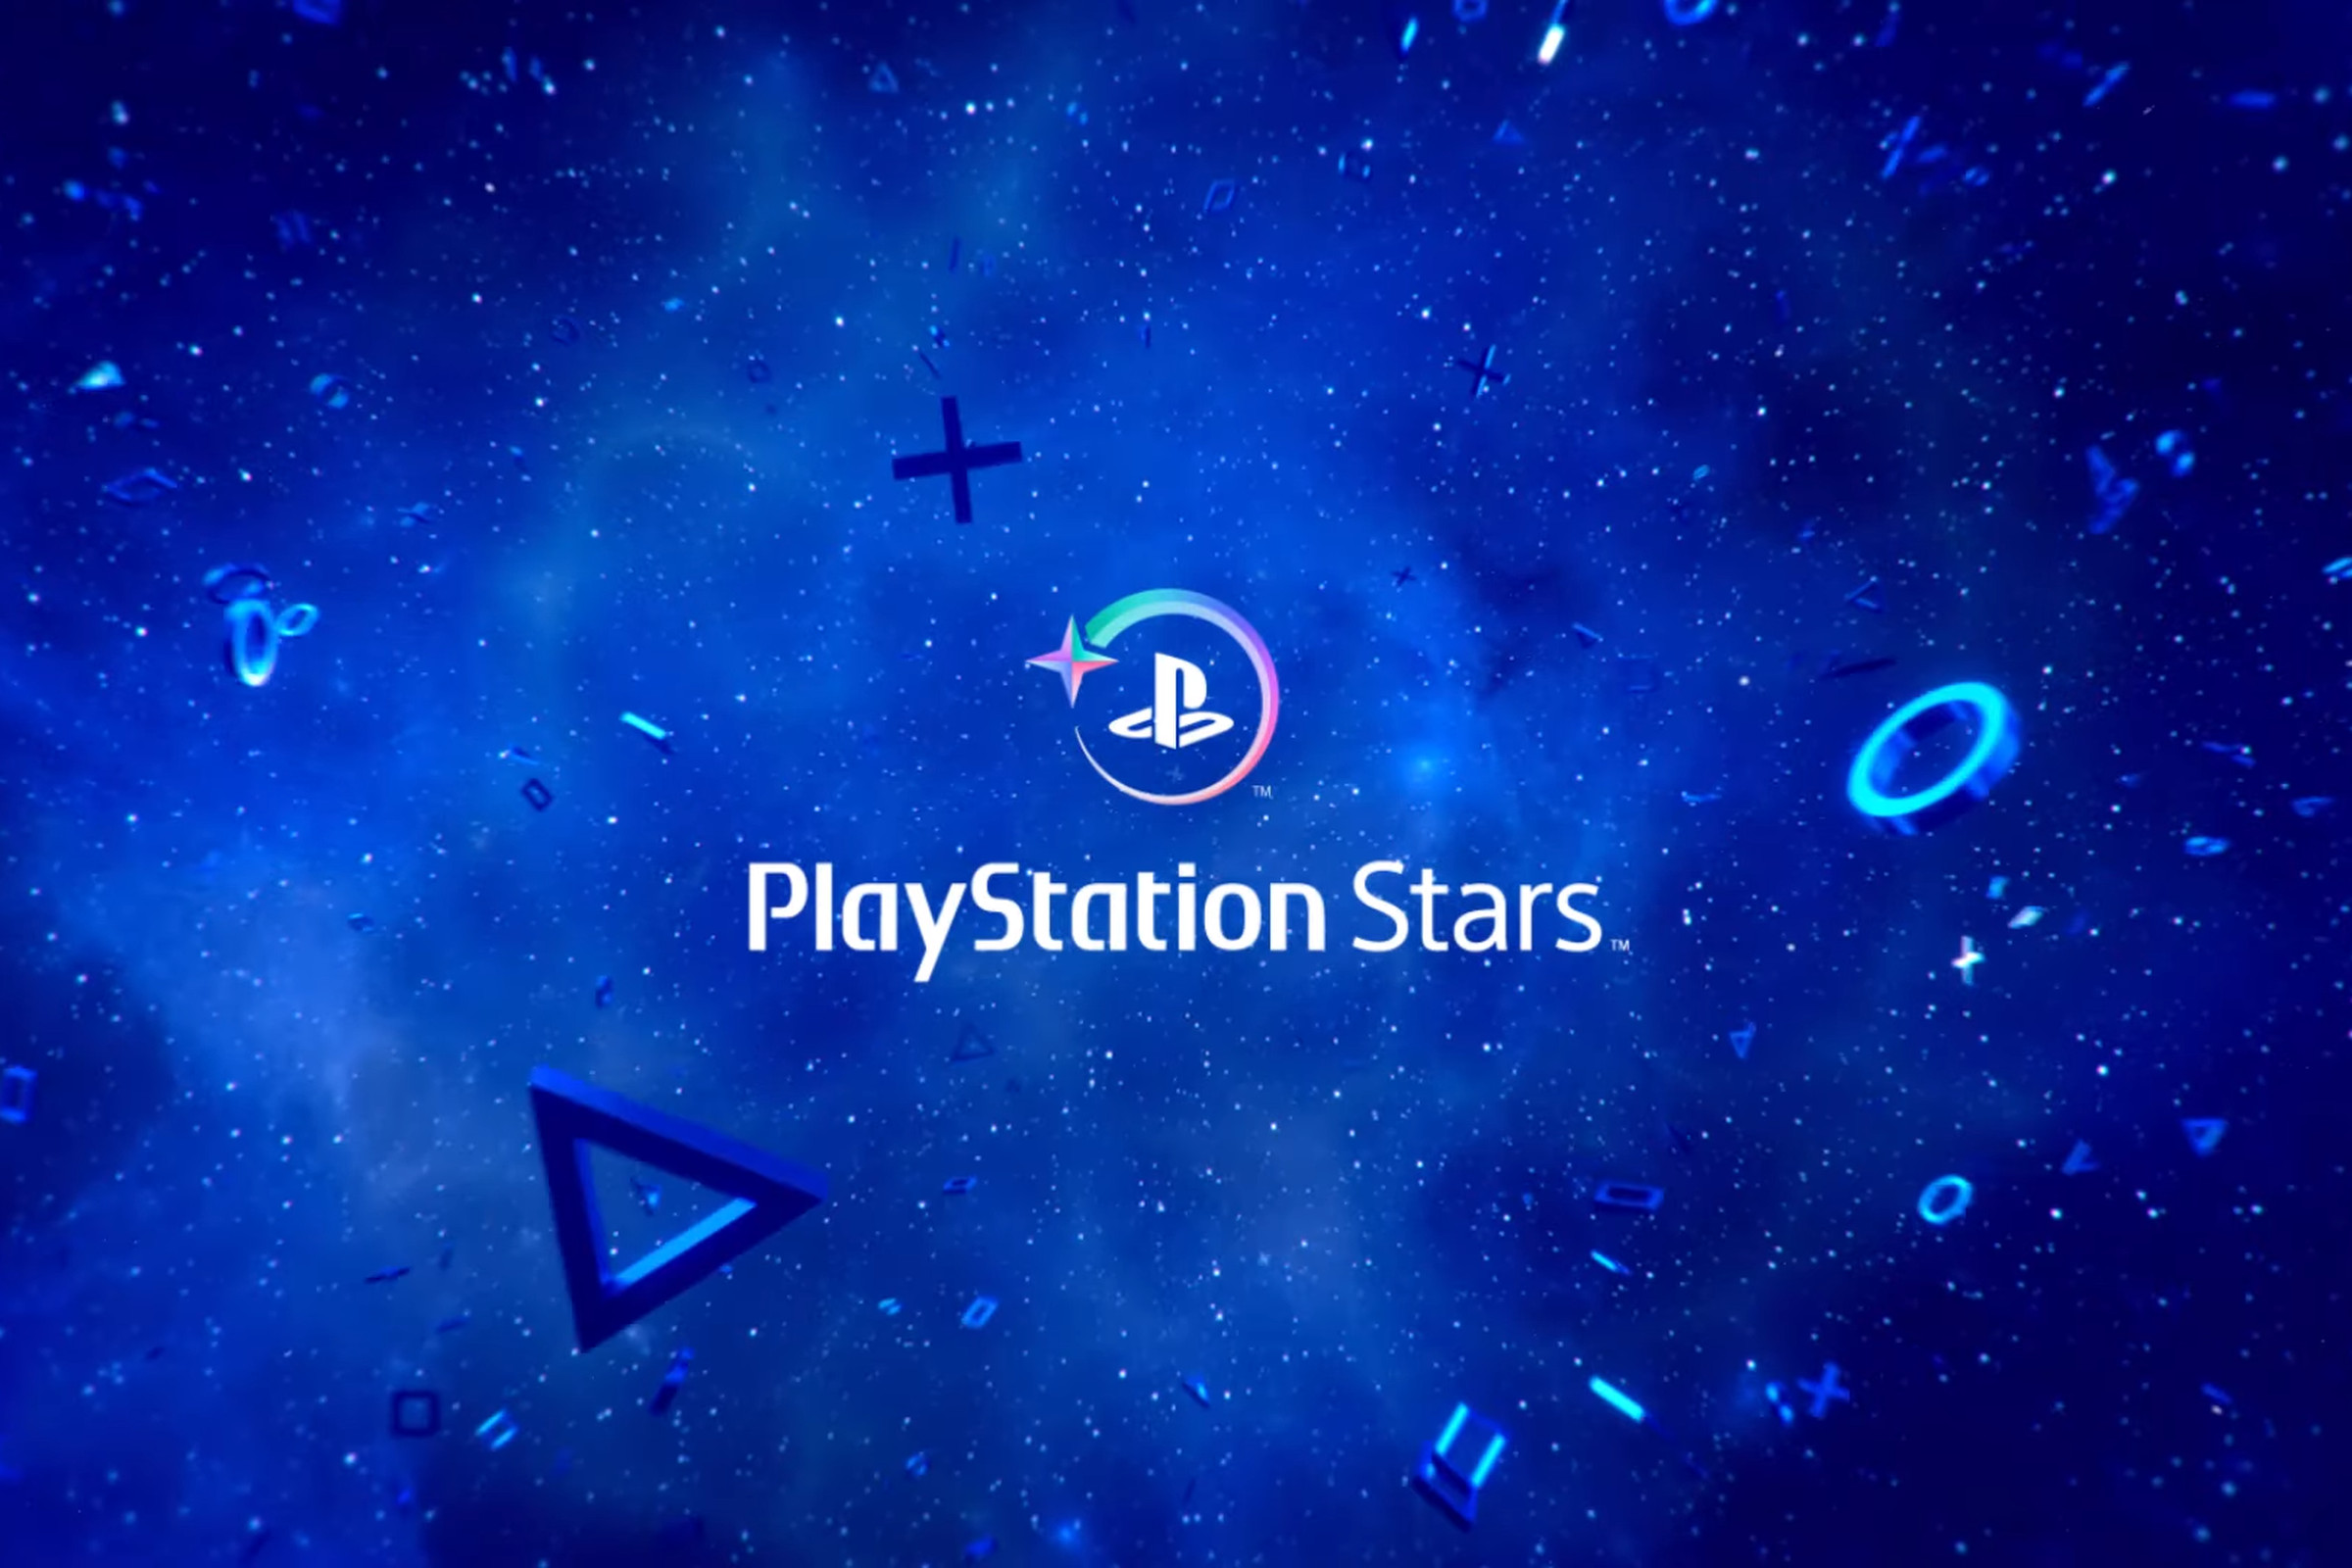 The PlayStation Stars logo on a space-themed background. The PlayStation button icons are floating around the image.